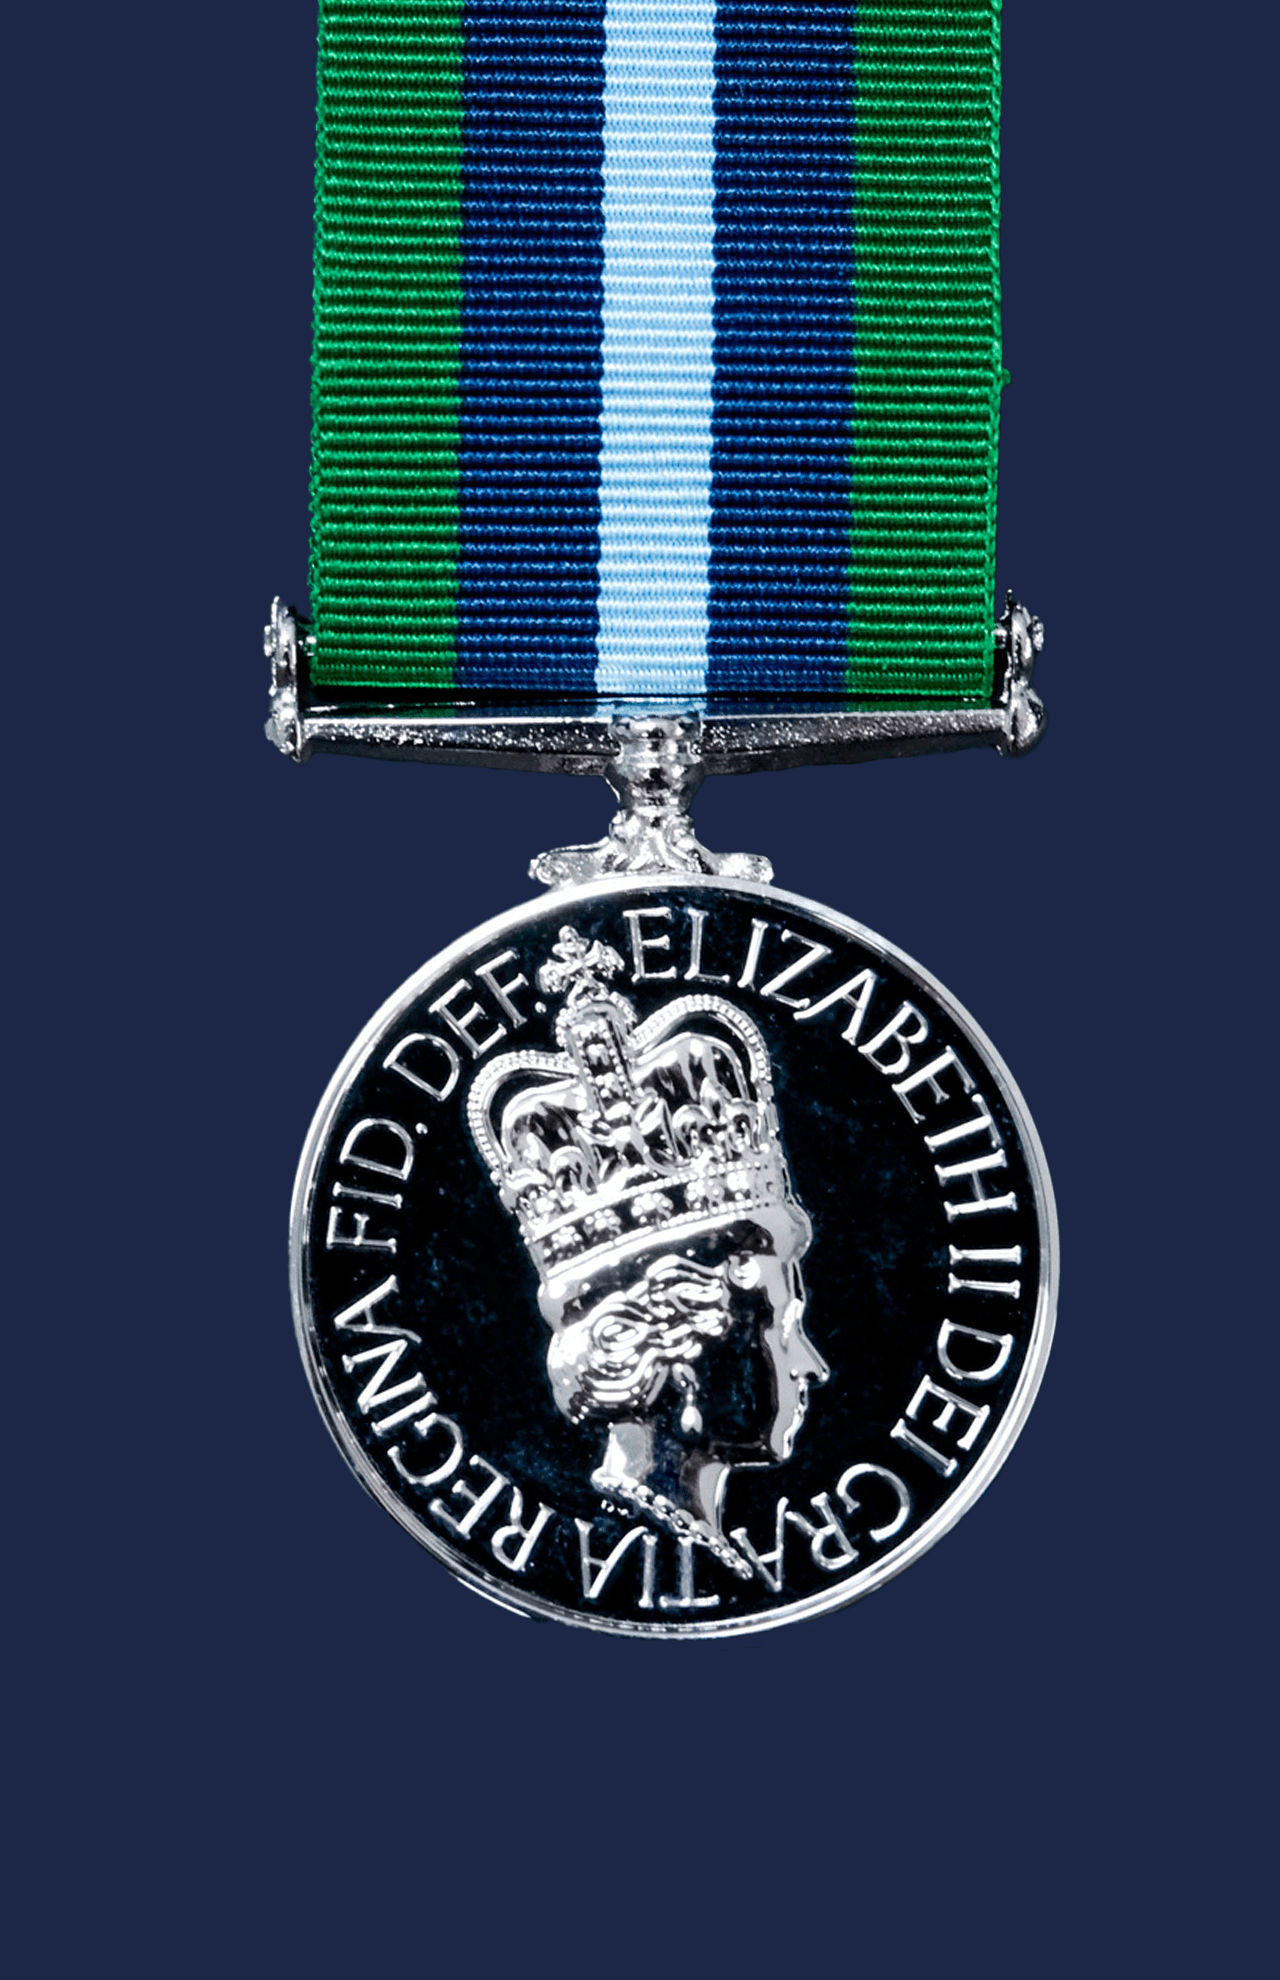 Worcestershire Medal Service: Northern Ireland Prison Service - Non-Operational